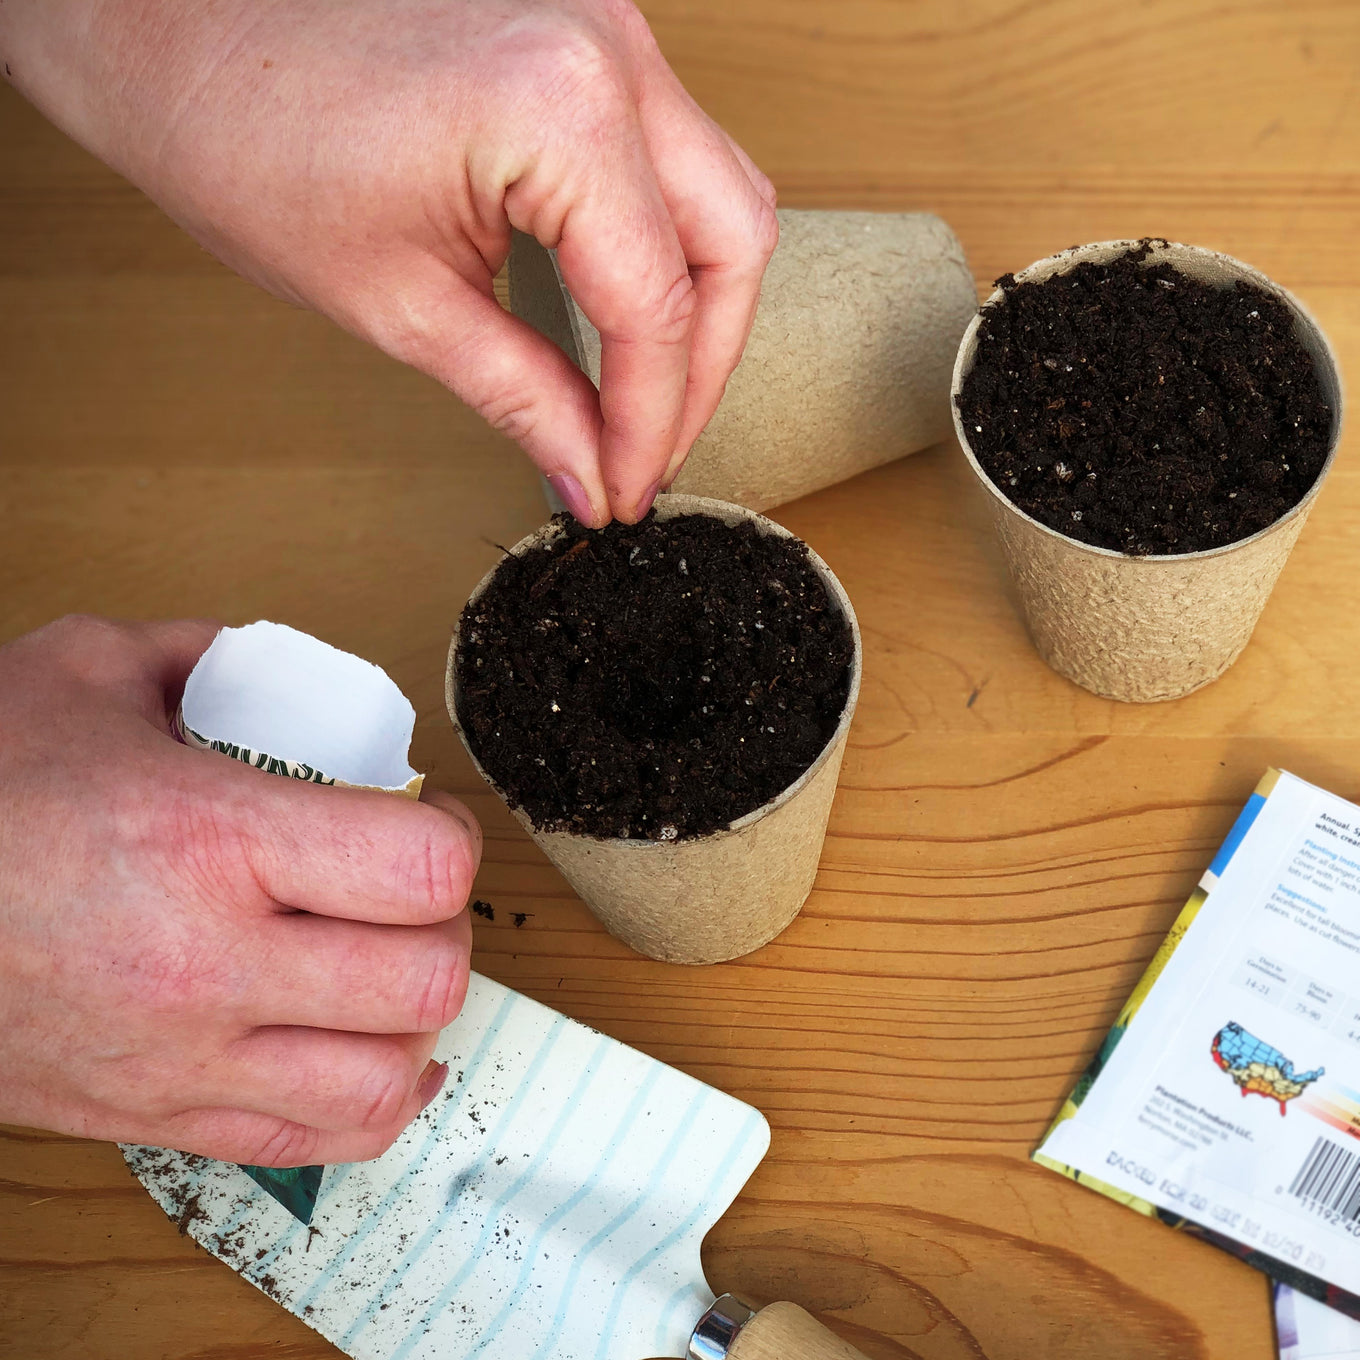 Start Giant Double Enchantress Zinnia seeds in biodegradable paper or peat pots.